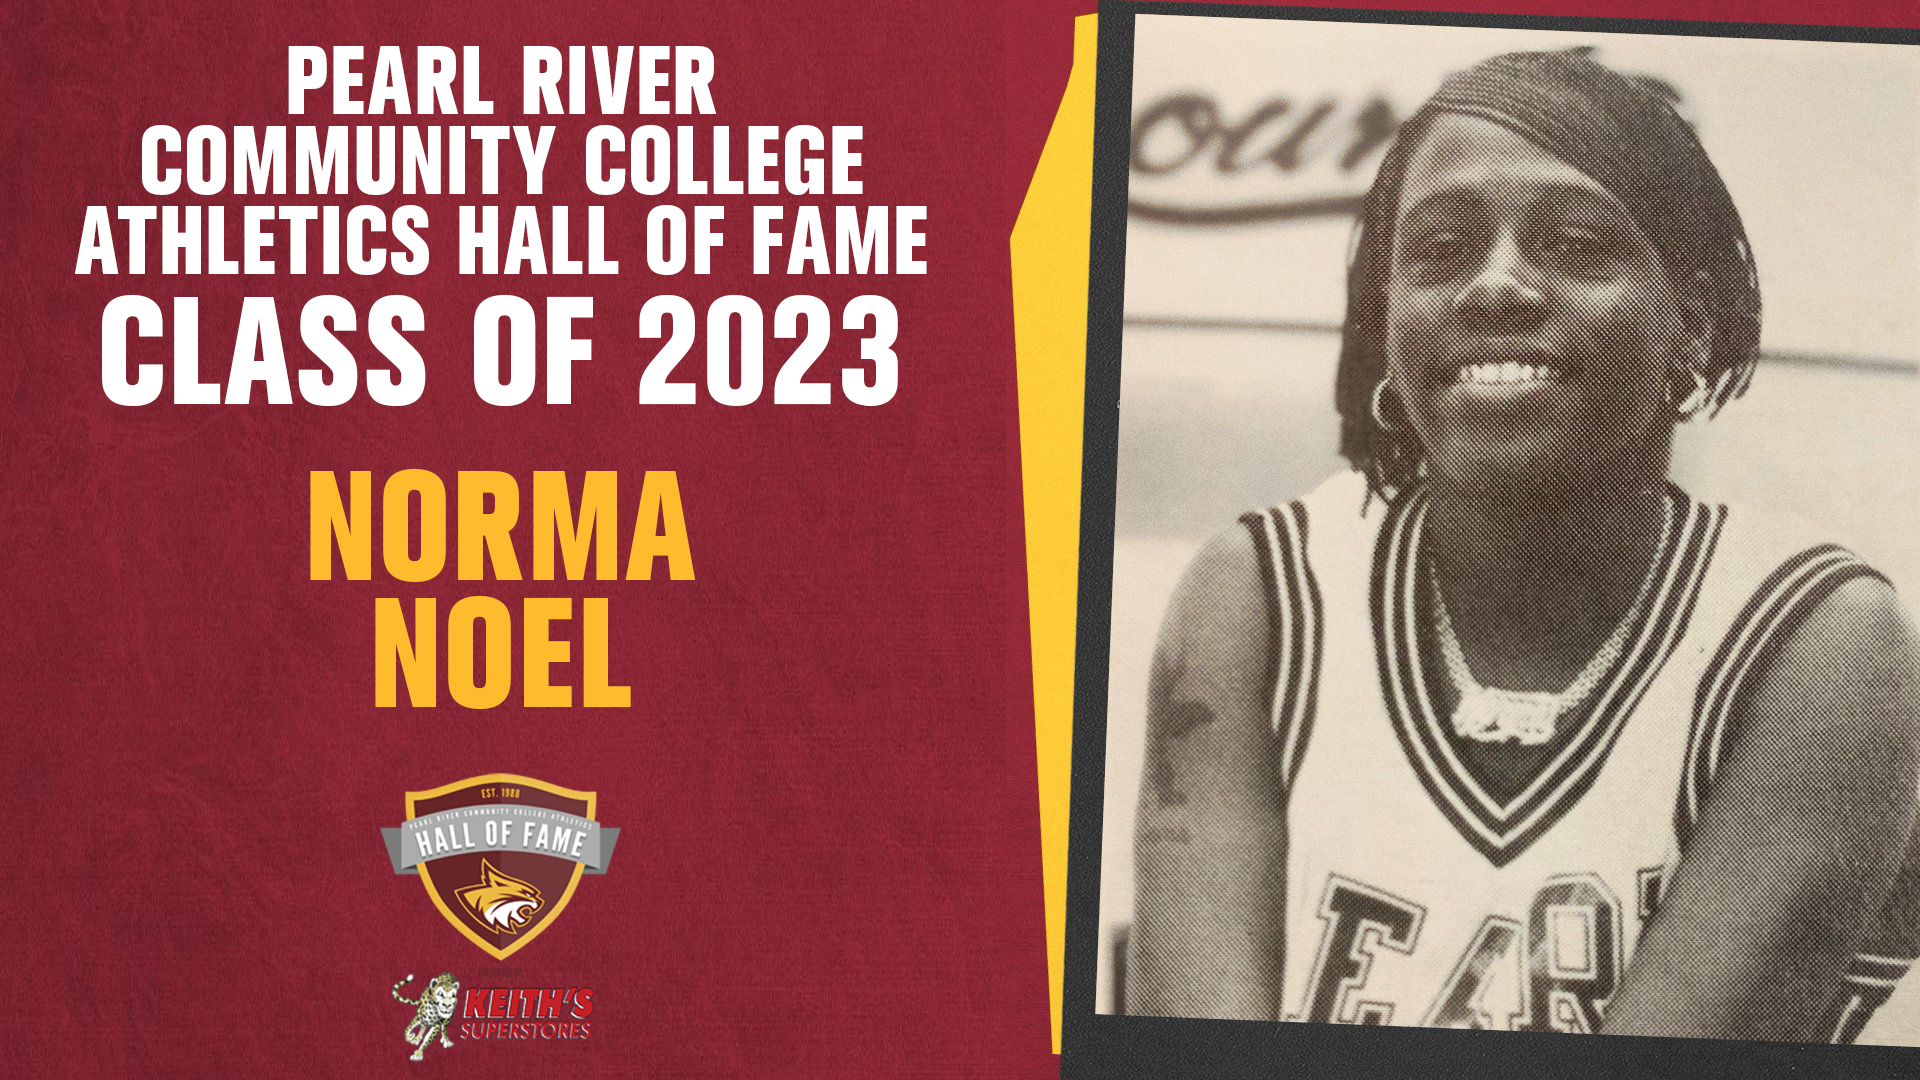 From Miami to Poplarville: Hall of Famer wished PRCC was 4-year college